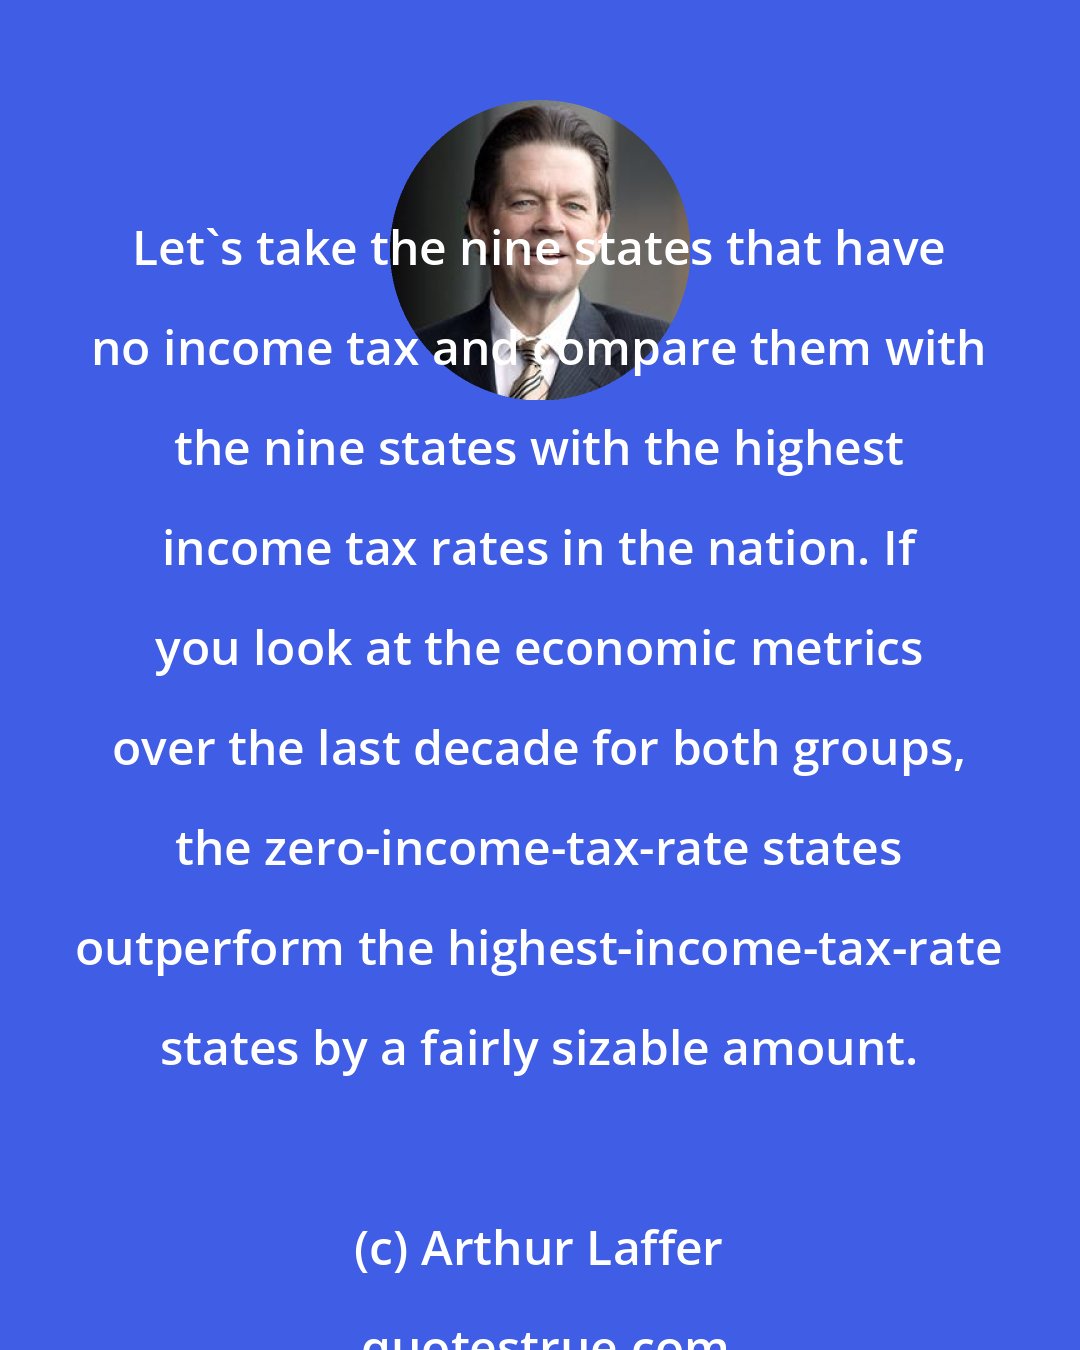 Arthur Laffer: Let's take the nine states that have no income tax and compare them with the nine states with the highest income tax rates in the nation. If you look at the economic metrics over the last decade for both groups, the zero-income-tax-rate states outperform the highest-income-tax-rate states by a fairly sizable amount.